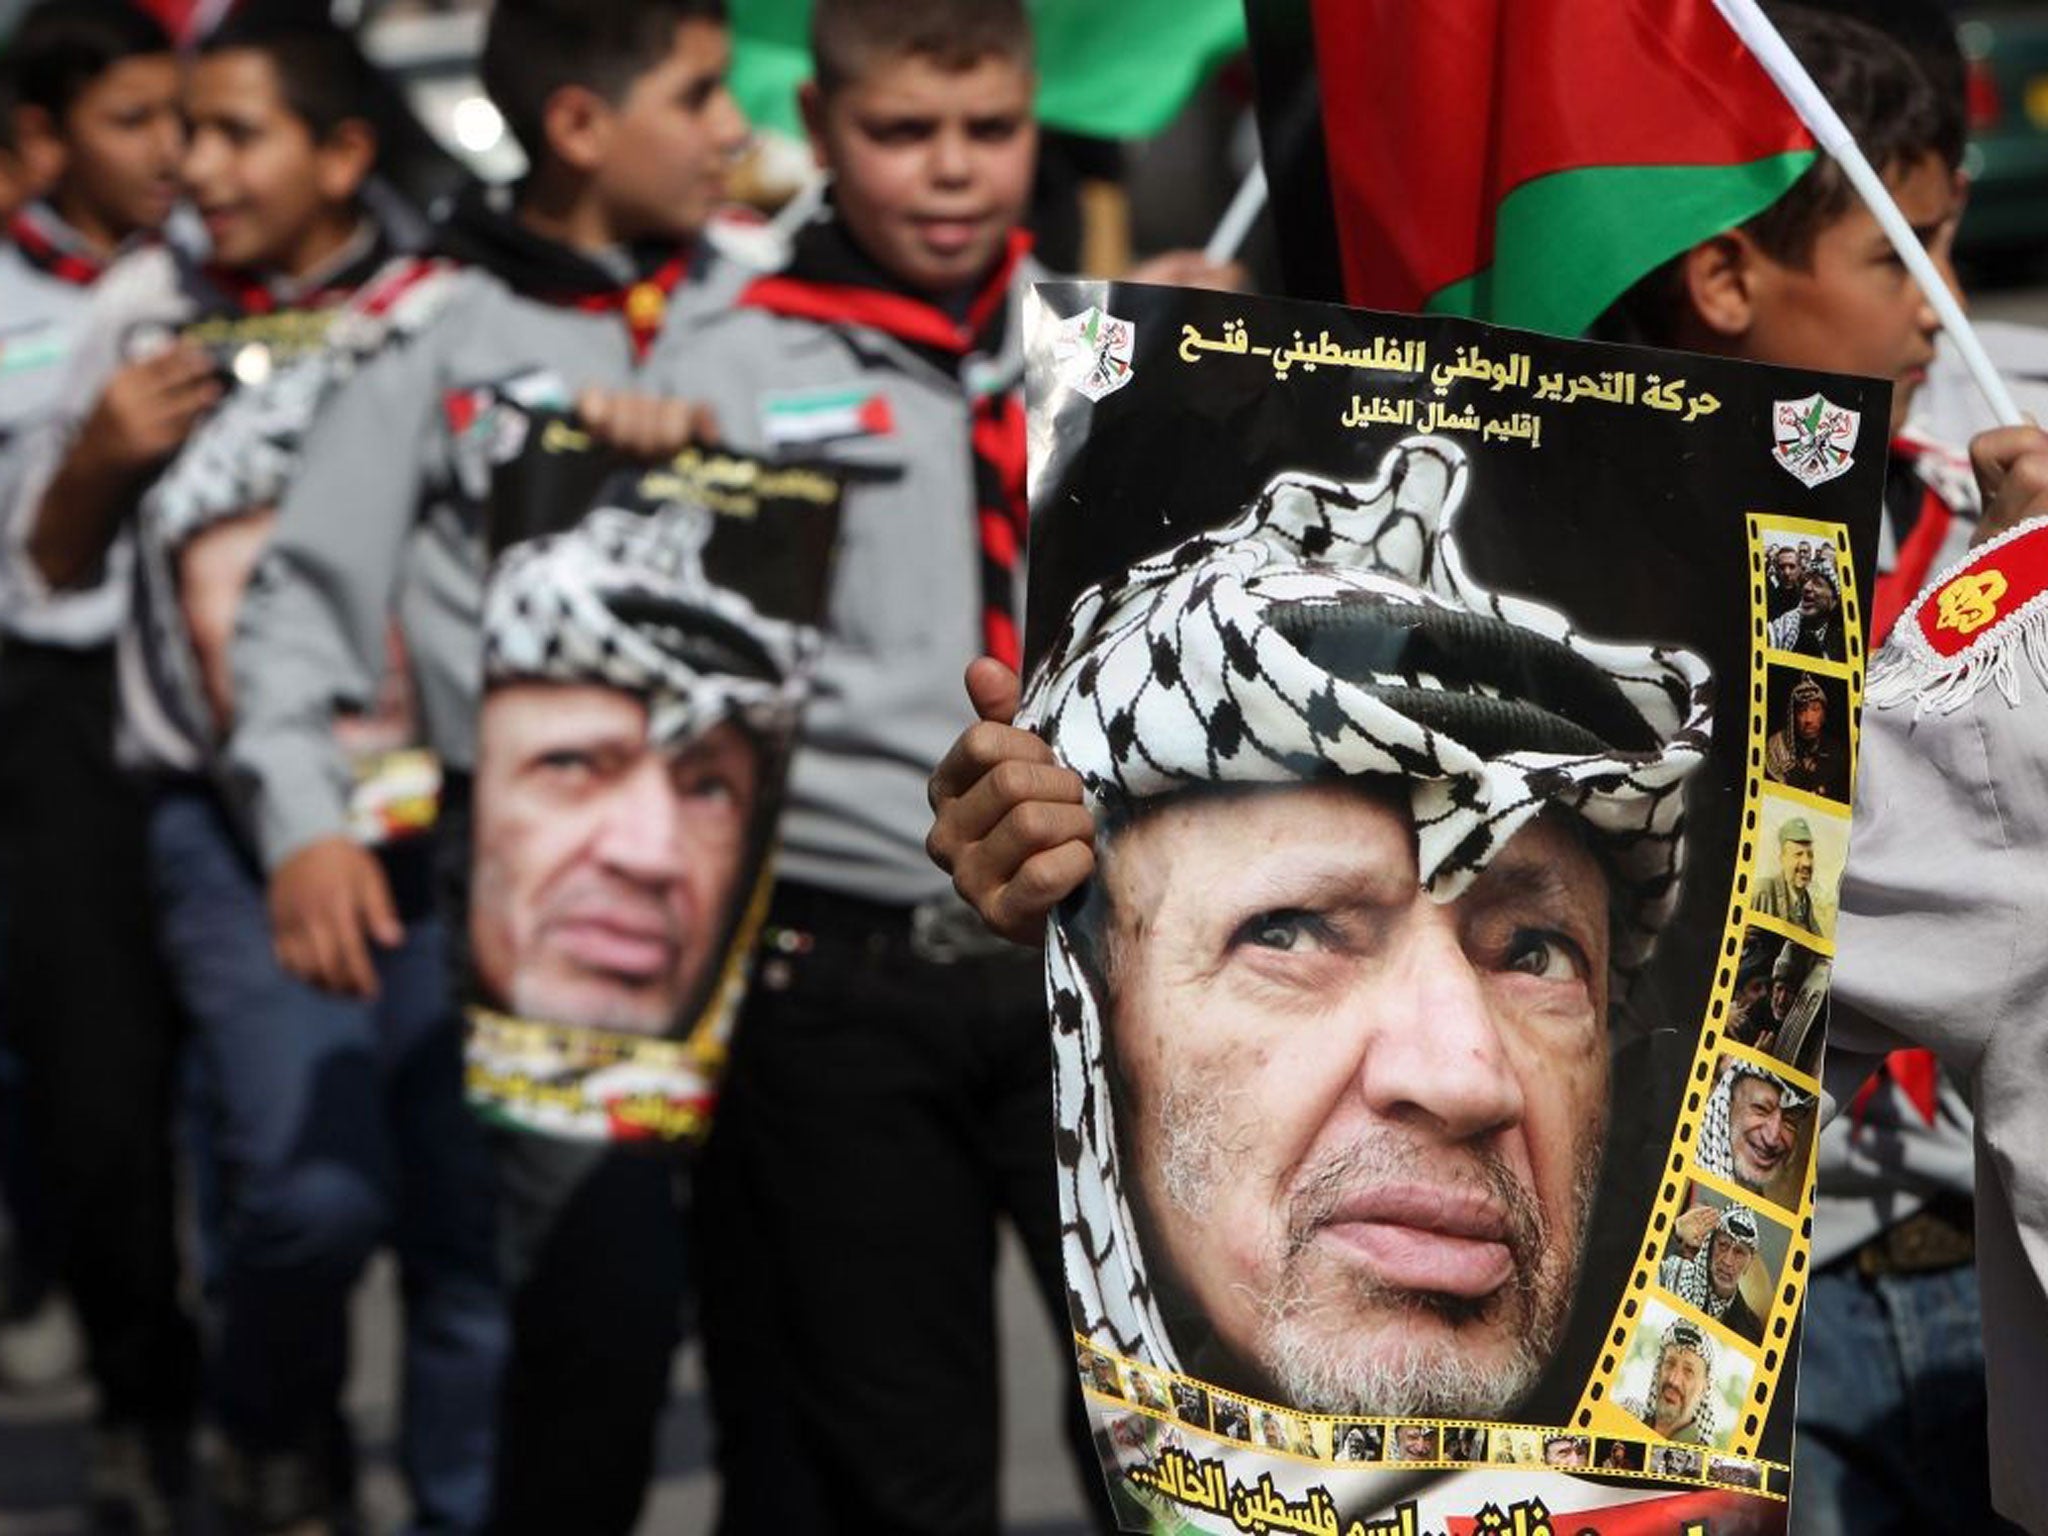 11 November 2013: Palestinian youth hold portraits of late Palestinian leader Yasser Arafat during a march in the West Bank town of Hebron to mark the ninth anniversary of Arafat's death